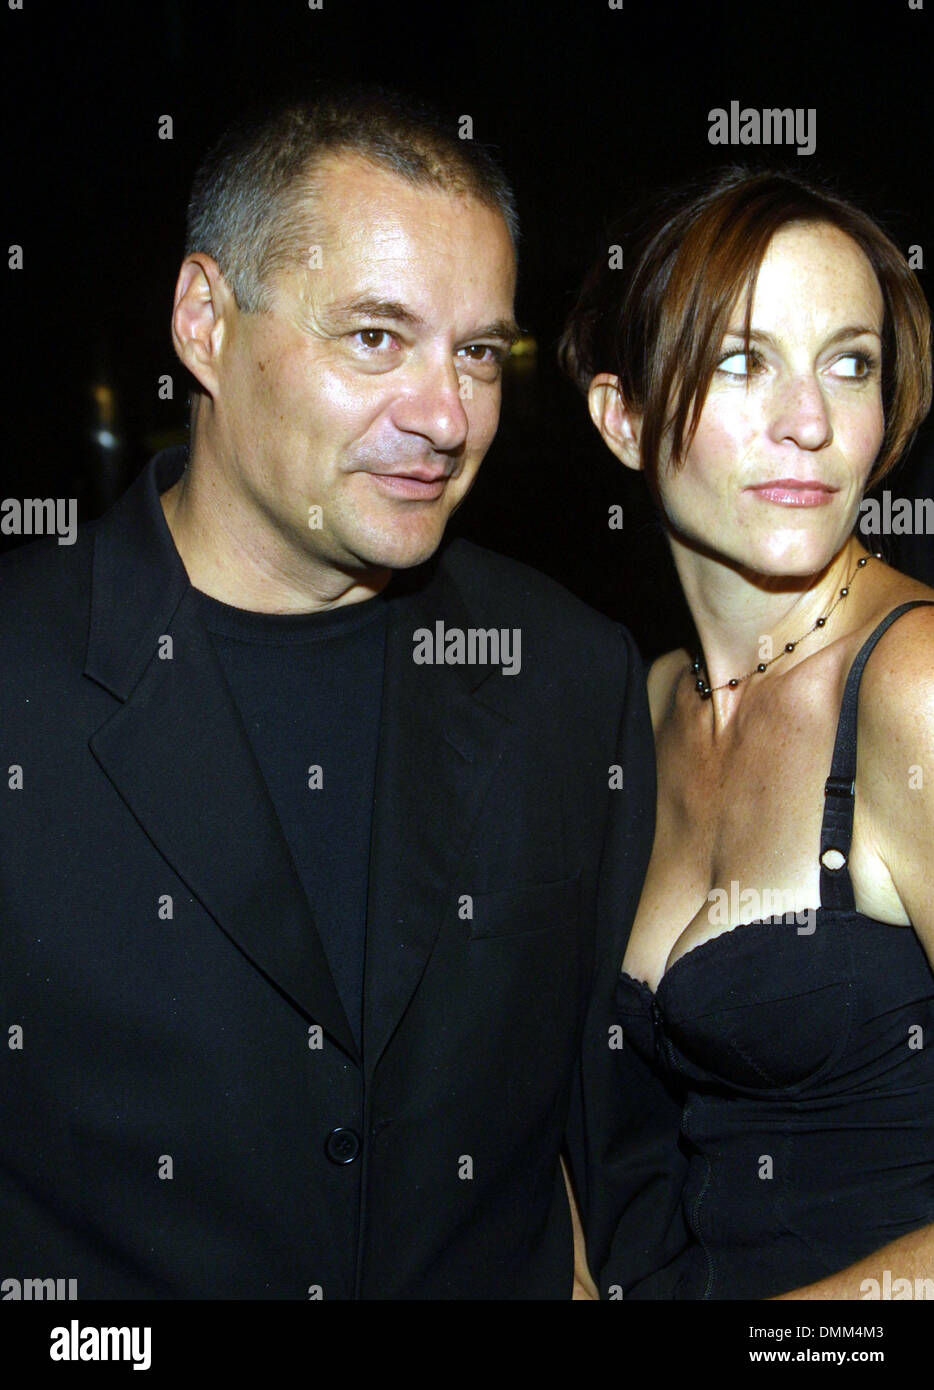 Oct. 9, 2001 - Beverly Hills, CALIFORNIA, USA - DIRECTOR JEAN-PIERRE JEUNET  AND LISA SULLIVAN.LOS ANGELES PREMIERE OF THE FILM 'AMELIE'.ACADEMY OF  MOTION PICTURE ARTS AND SCIENCES, BEVERLY HILLS, CA.OCTOBER 9, 2001.